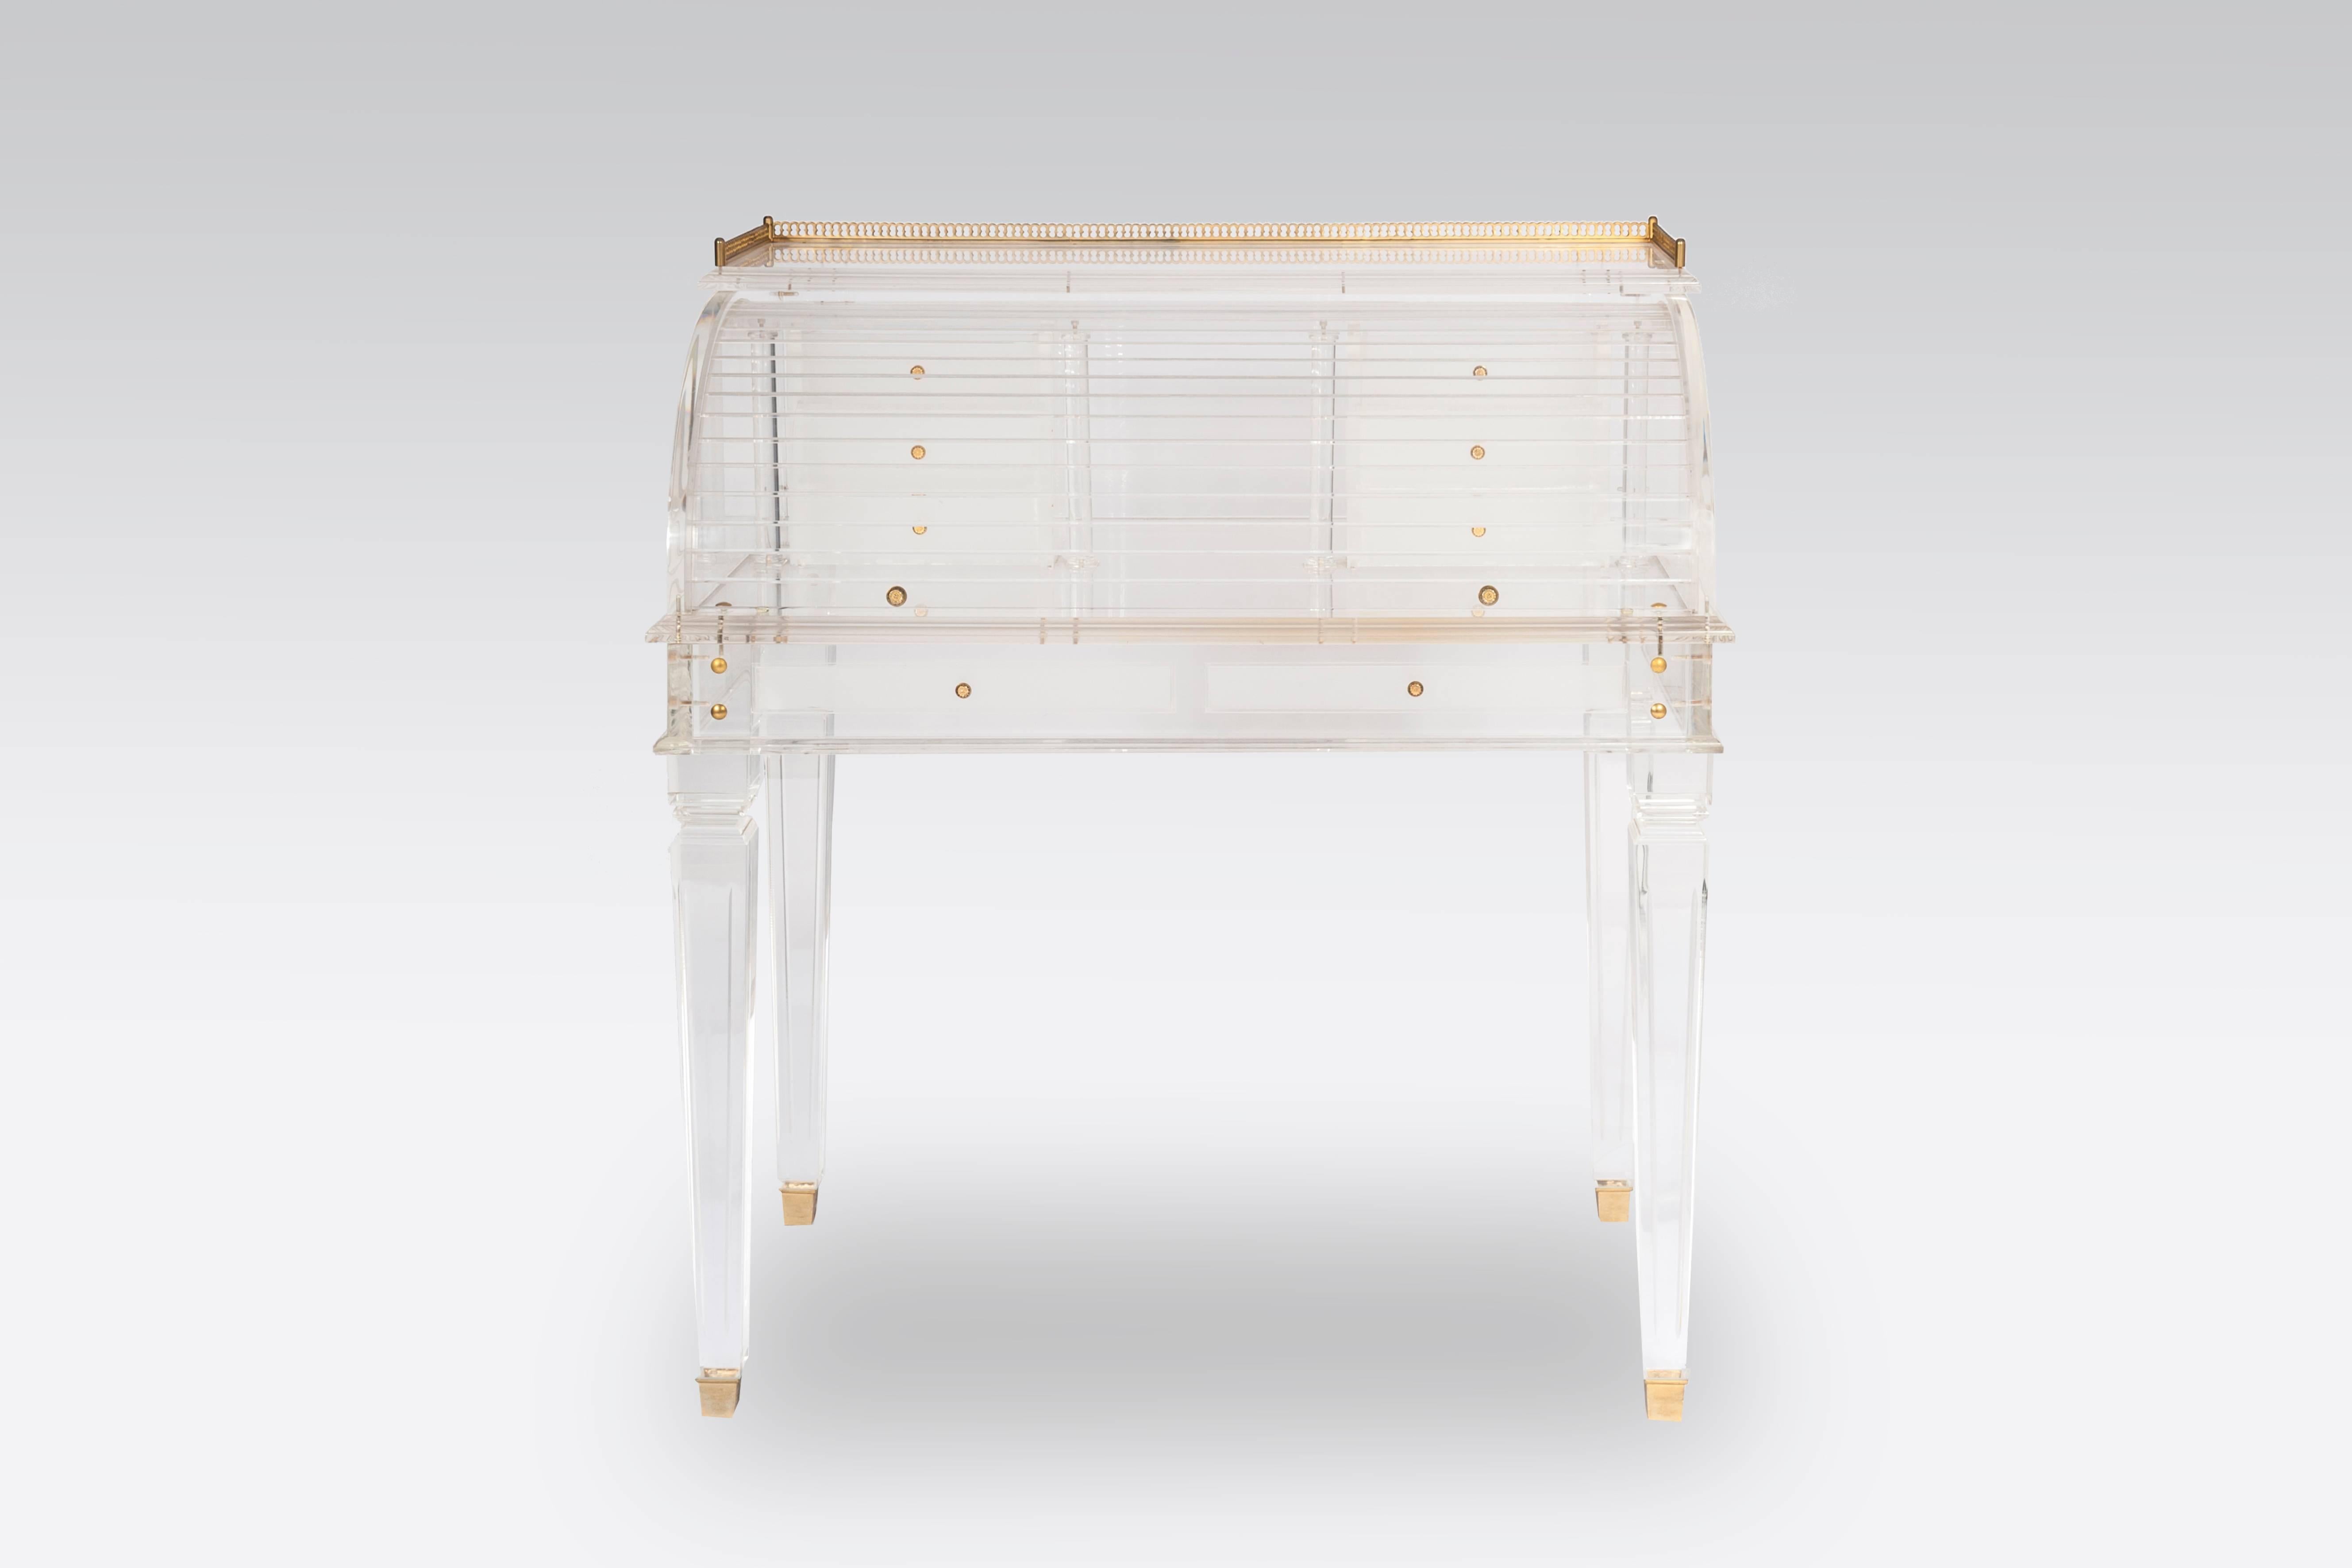 Amazing very rare limited edition cylinder secretary desk in Lucite late 1980s
This is the best secretary kept in town: A fine art, exquisite piece of furniture offered in mint condition. It is pretty unbelievable to look inside this original